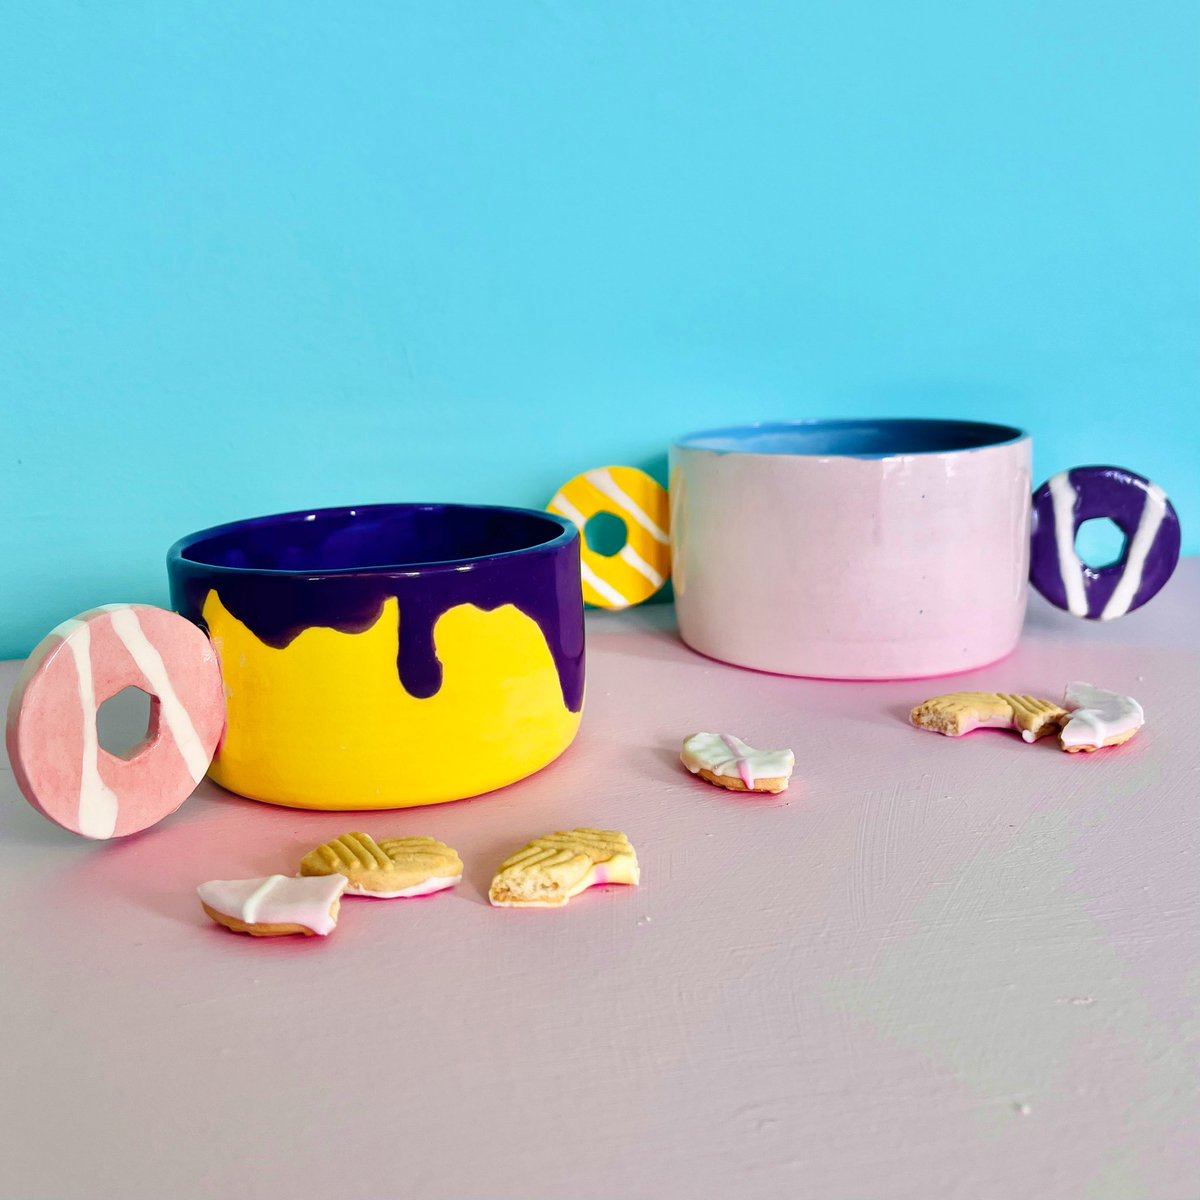 With a big birthday approaching for me this week 😯 I’m getting in the party spirit with party ring inspired ceramics new on AdamCeramic.com 🥳🎉